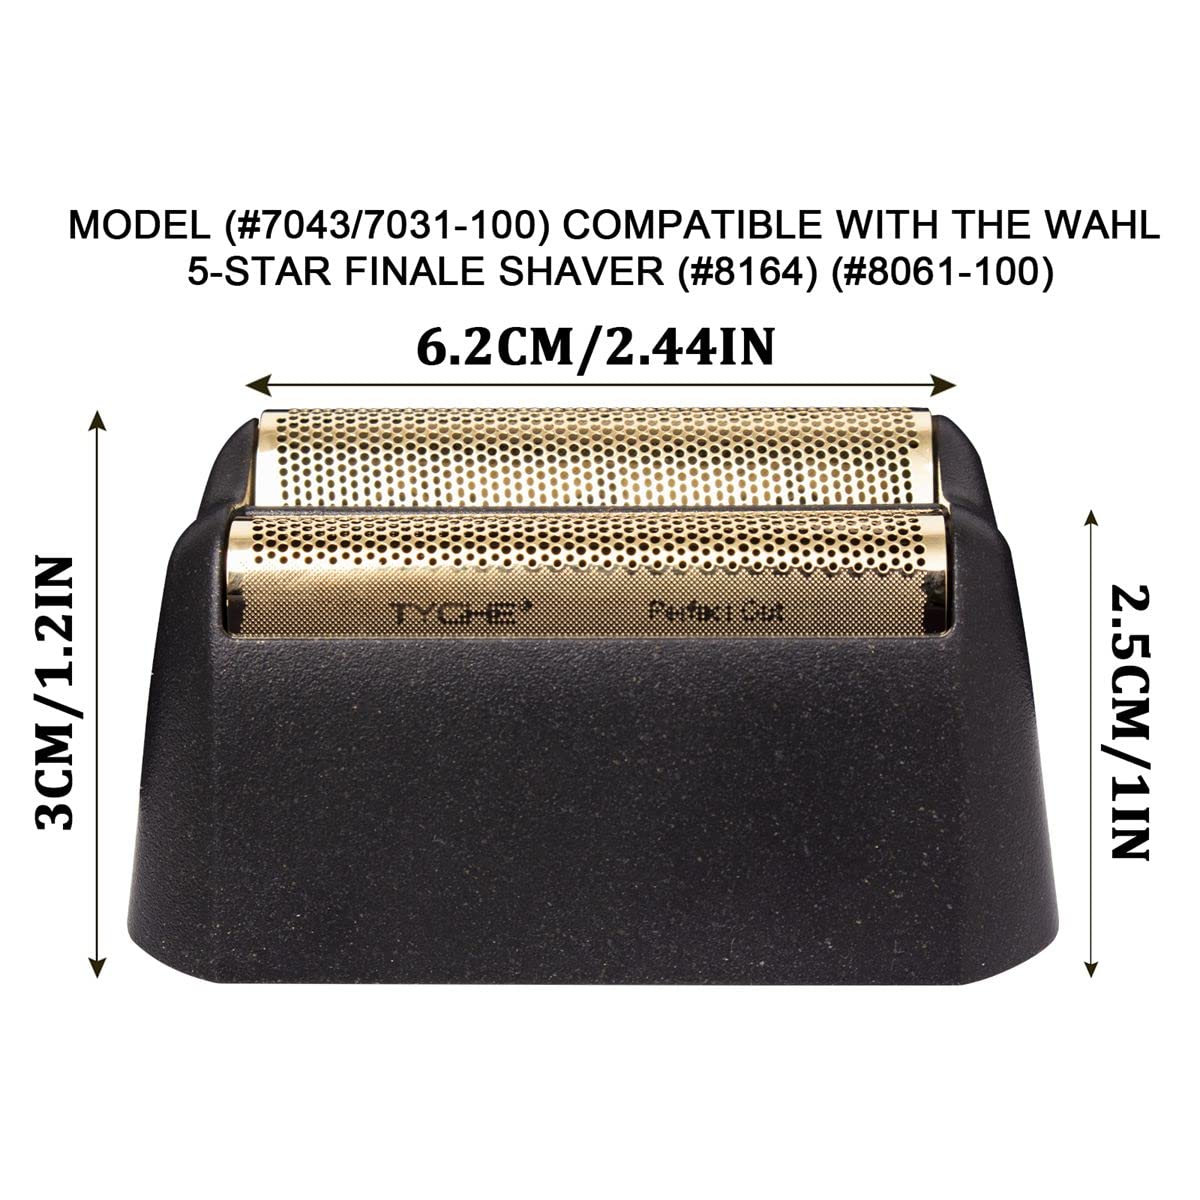 Professional 5 Star Series Finale Shaver Shaper Replacement Foil and Cutter Bar Assembly Compatible with Wahl Shaver Model 7031-100, 7043-100 Super Close Super Close Shaving Replacement Heads,Gold